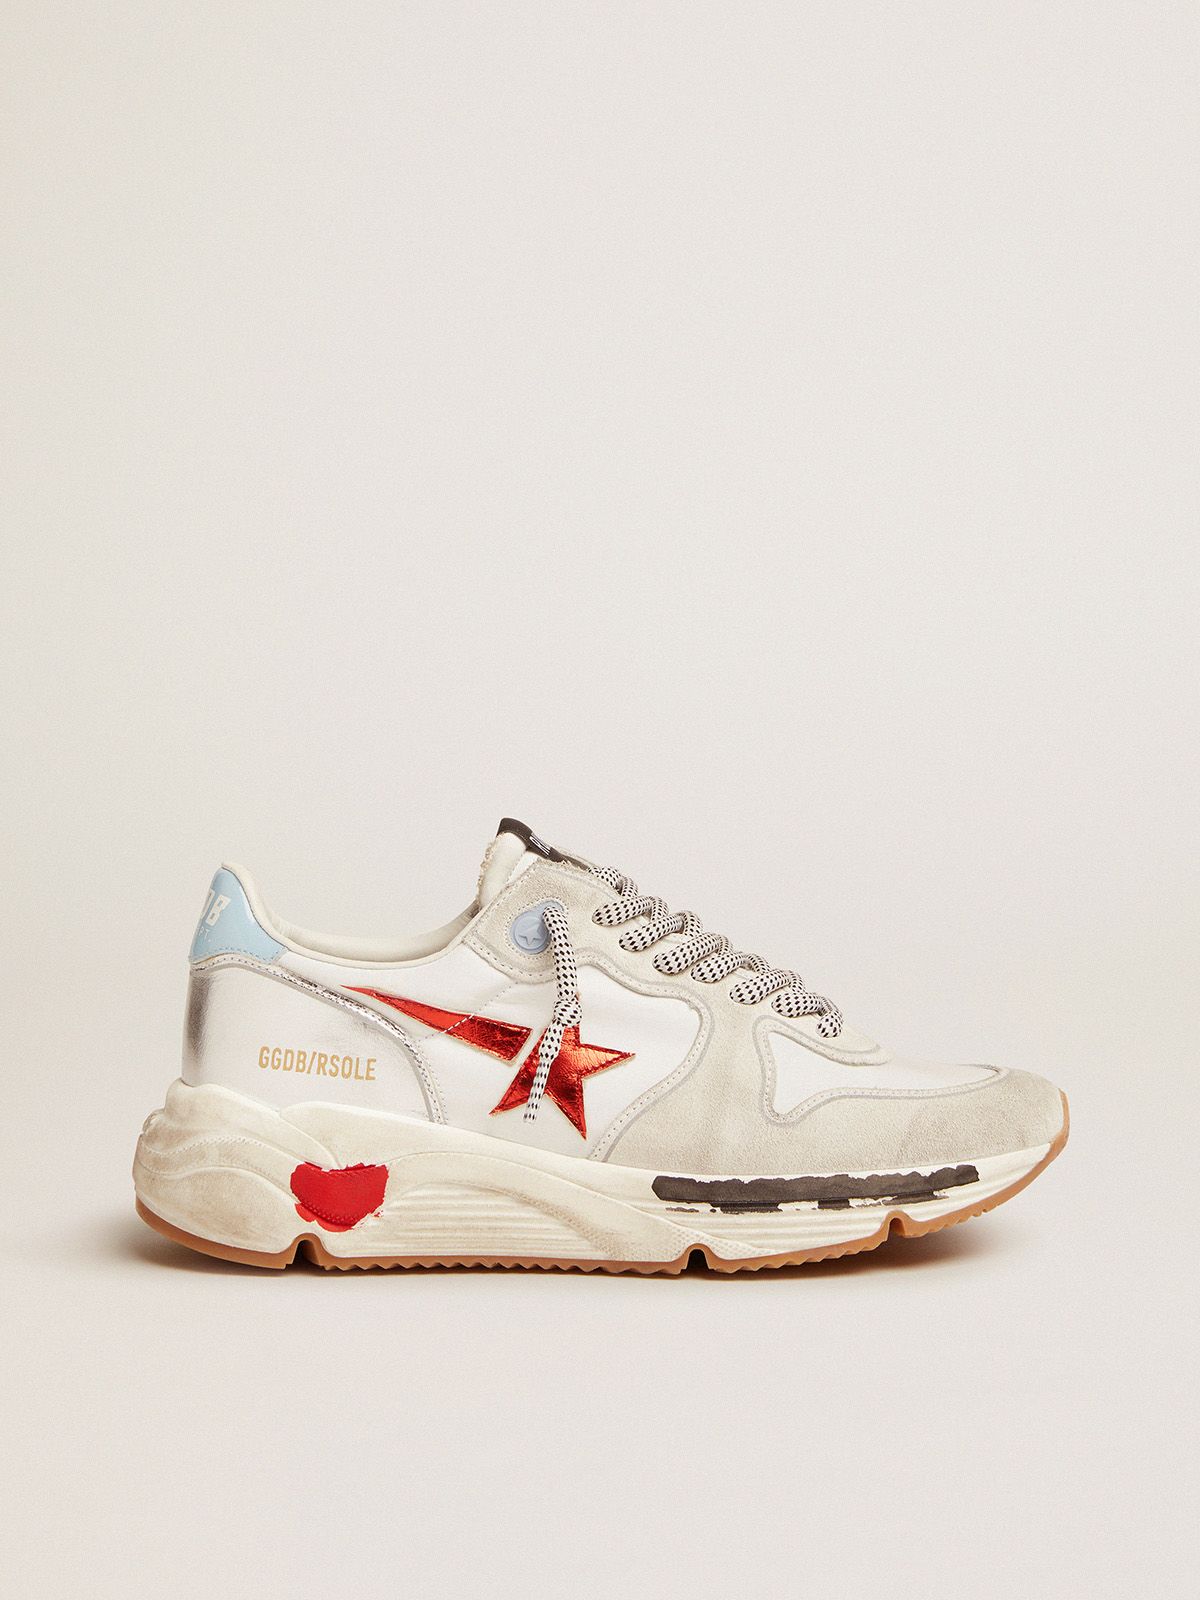 golden goose with suede leather in Sole and red laminated sneakers nylon Running star